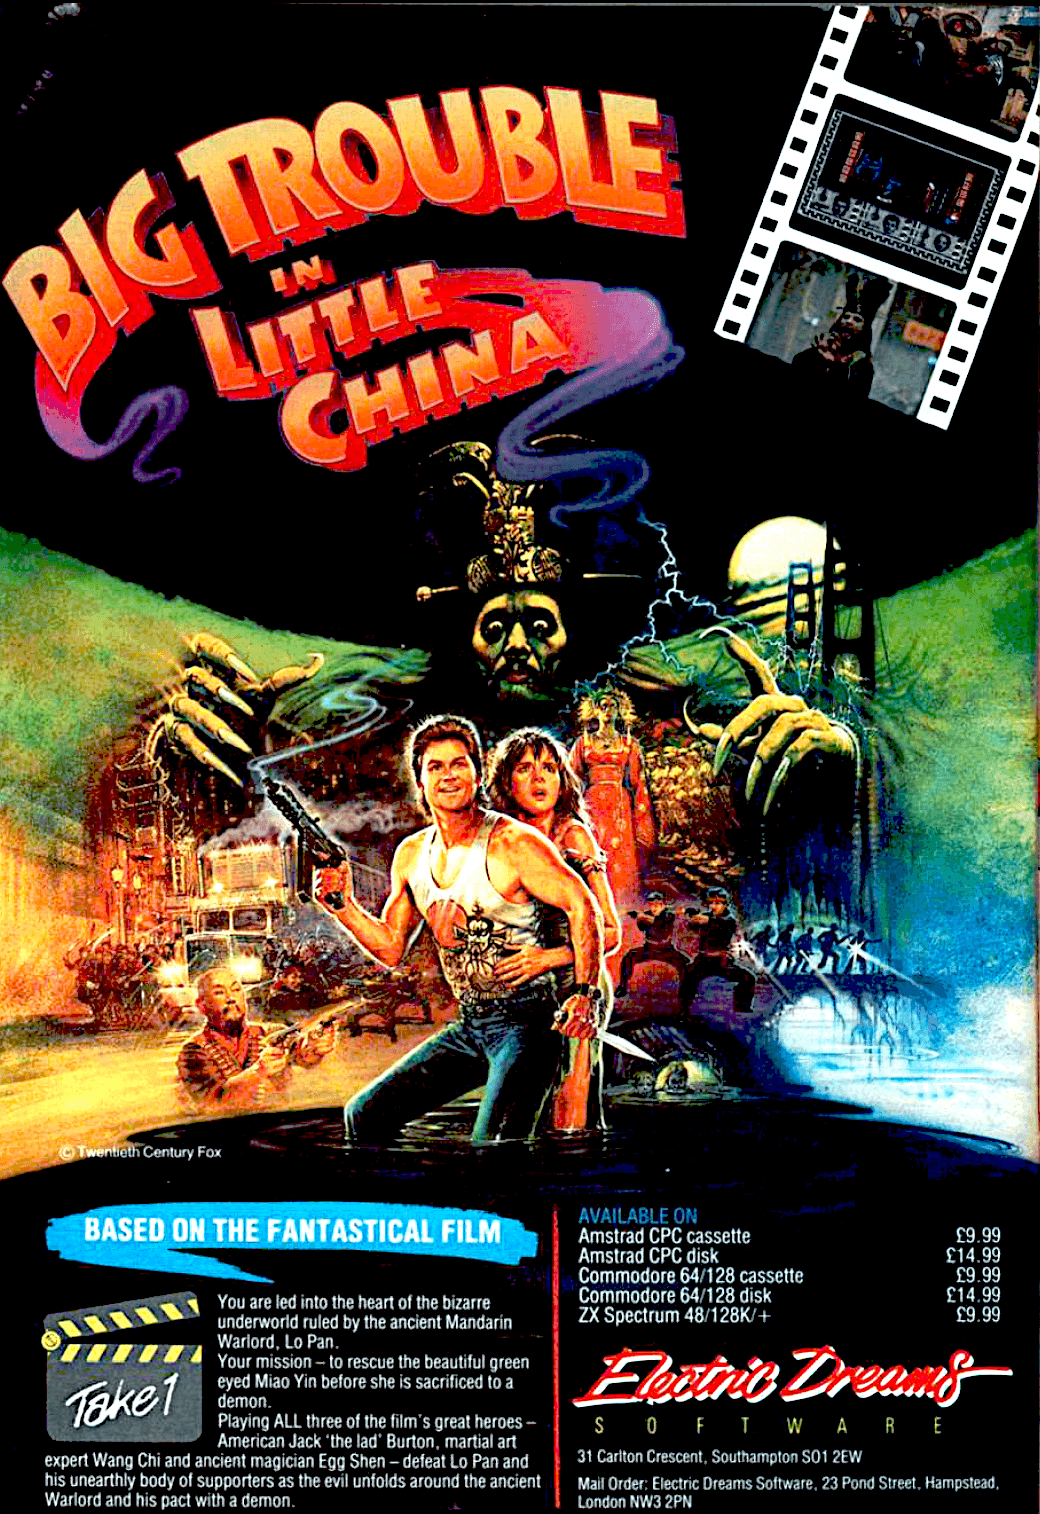 Image For Post | In this tie-in to the 1986 John Carpenter movie starring Kurt Russell, you must thwart the evil plans of Mandarin Lo Pan who has kidnapped two green-eyed girls in order to marry and sacrifice them in order to become mortal again. You play as 3 characters, one at a time, in this action platformer:

- Jack Burton, a burly but bit dumb action hero who fights with fists and later with a "Bushmaster" gun. Ammo must be found to be able to keep using it.

- Wang Chi, whose girlfriend along with Jack's has been kidnapped, uses Martial Arts and later a sword when found. More swords will be needed as they will break after awhile.

- Egg Shen is a magician who has vowed to stop the ancient prophecy from coming about, and fights with magic bolts which can turn later on into more powerful lightning if magic potions are found.

Each character has an energy status bar at bottom of screen represented by a Yin and Yang Symbol that slowly disappears but can be replenished by finding food. A weapons symbol is shown if they possess it and magic potion symbol will give them extra strength if found. You must alternate among the 3 characters to keep their status from falling too low and dying, and each has to pick up their own appropriate weapons. They all can move forwards and backwards, jump, duck and attack at different heights.

They have to fight through several levels including the streets of Chinatown, where martial artist enemies await and gunmen that must be avoided until more experience is gathered. Further on, you go into the sewers where additional monsters must be avoided by jumping over them. Then they will reach the rooms of the underground lair of Lo Pan where large-hat wearing elementals called Storms await. The final battle takes place in the Marriage chamber where armoured warriors and the levitating Lo Pan must be vanquished in order to free the kidnapped girls.